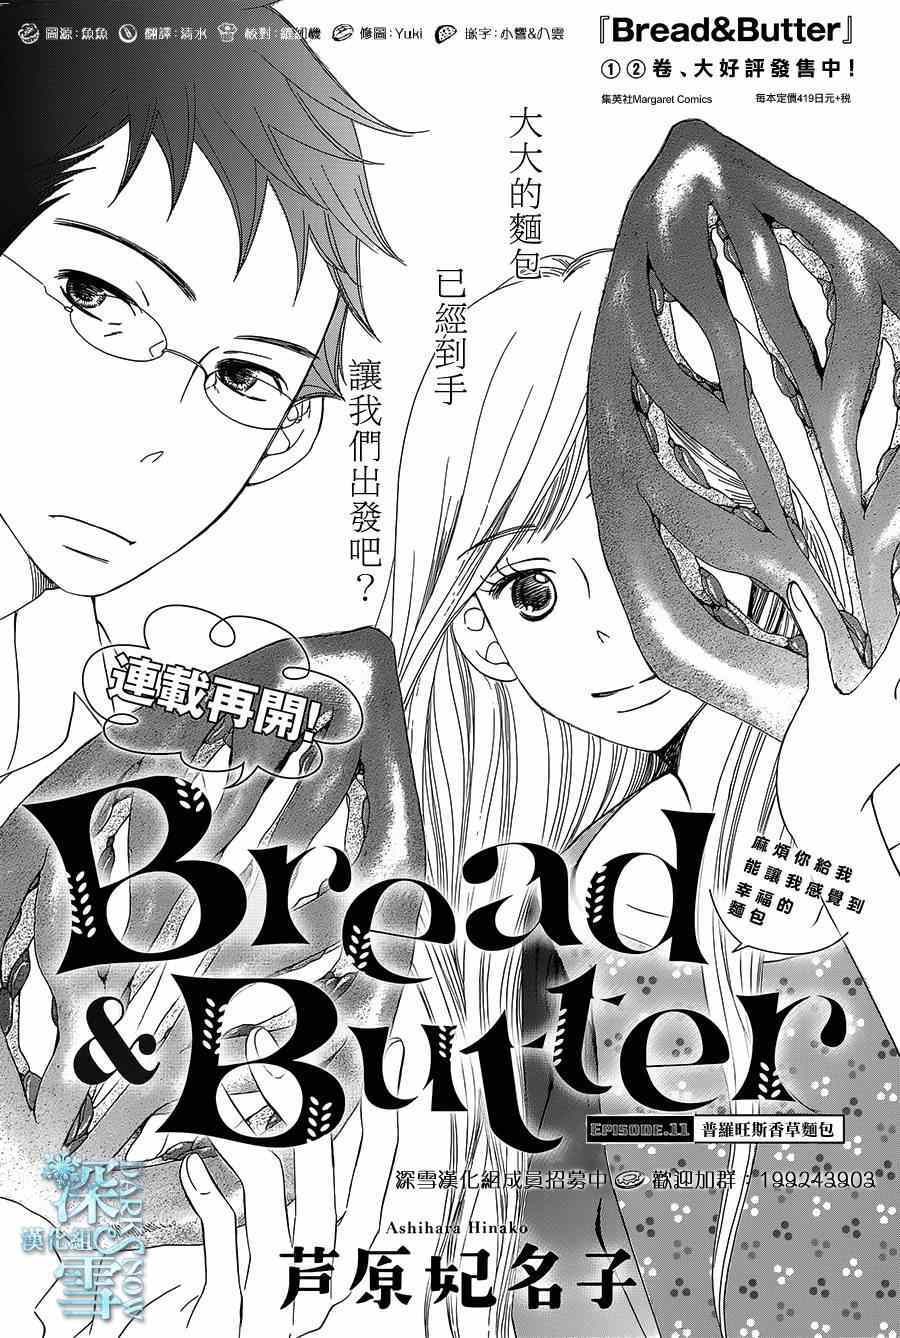 Bread&Butter - 第11話 - 1